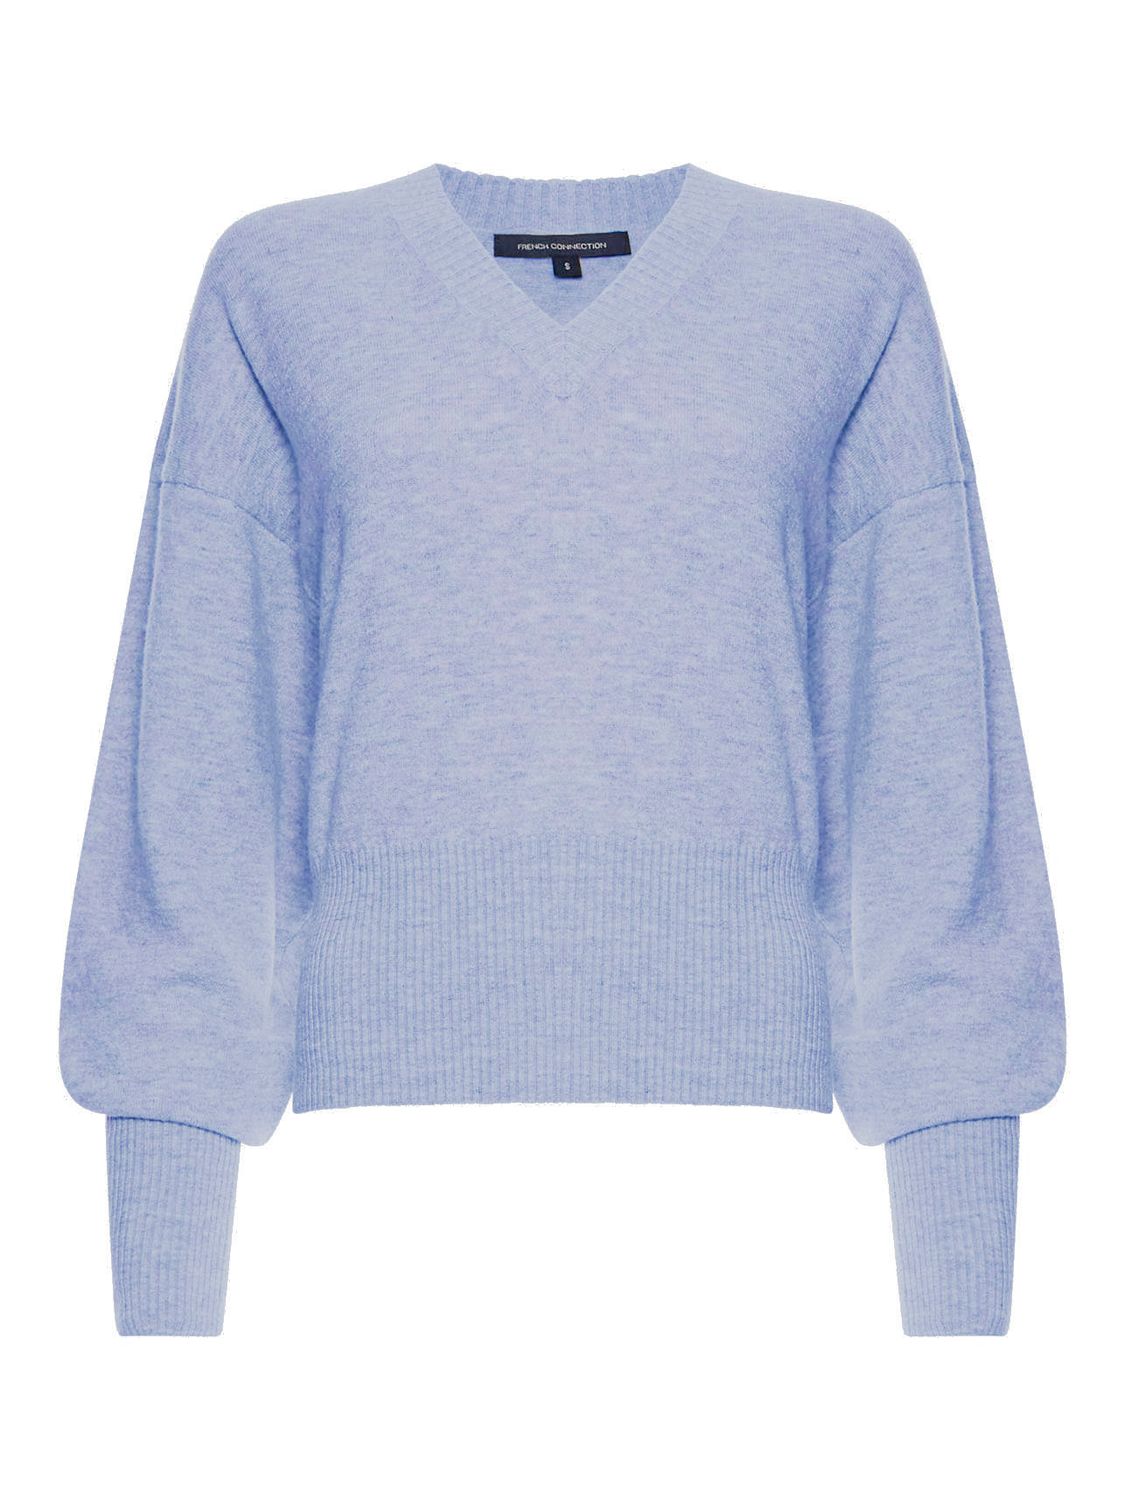 French Connection Libby Vhari Jumper, Paradise Blue at John Lewis ...